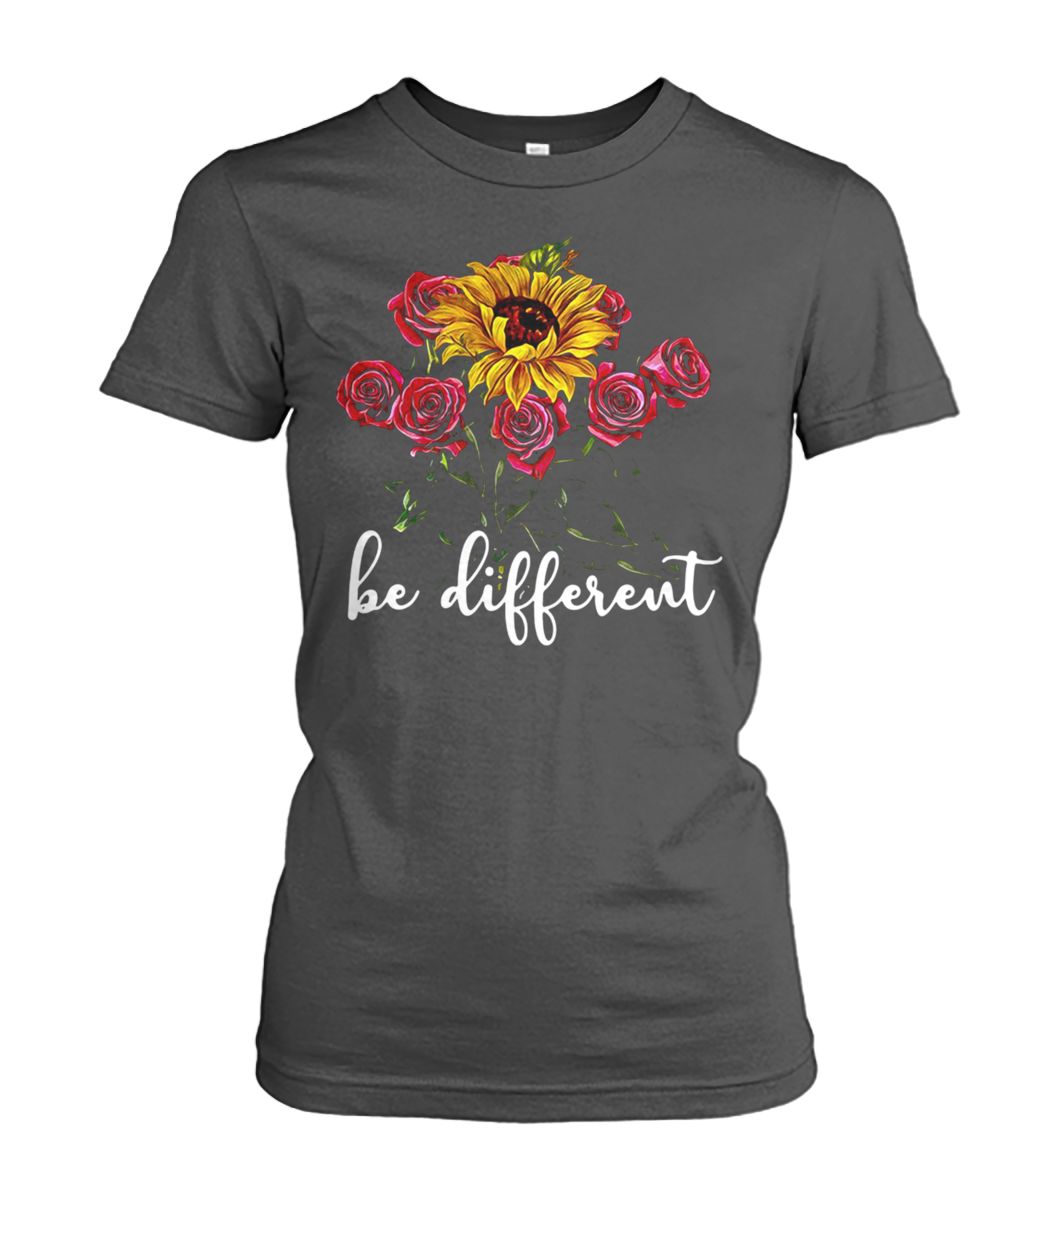 Sunflower and roses be different women's crew tee